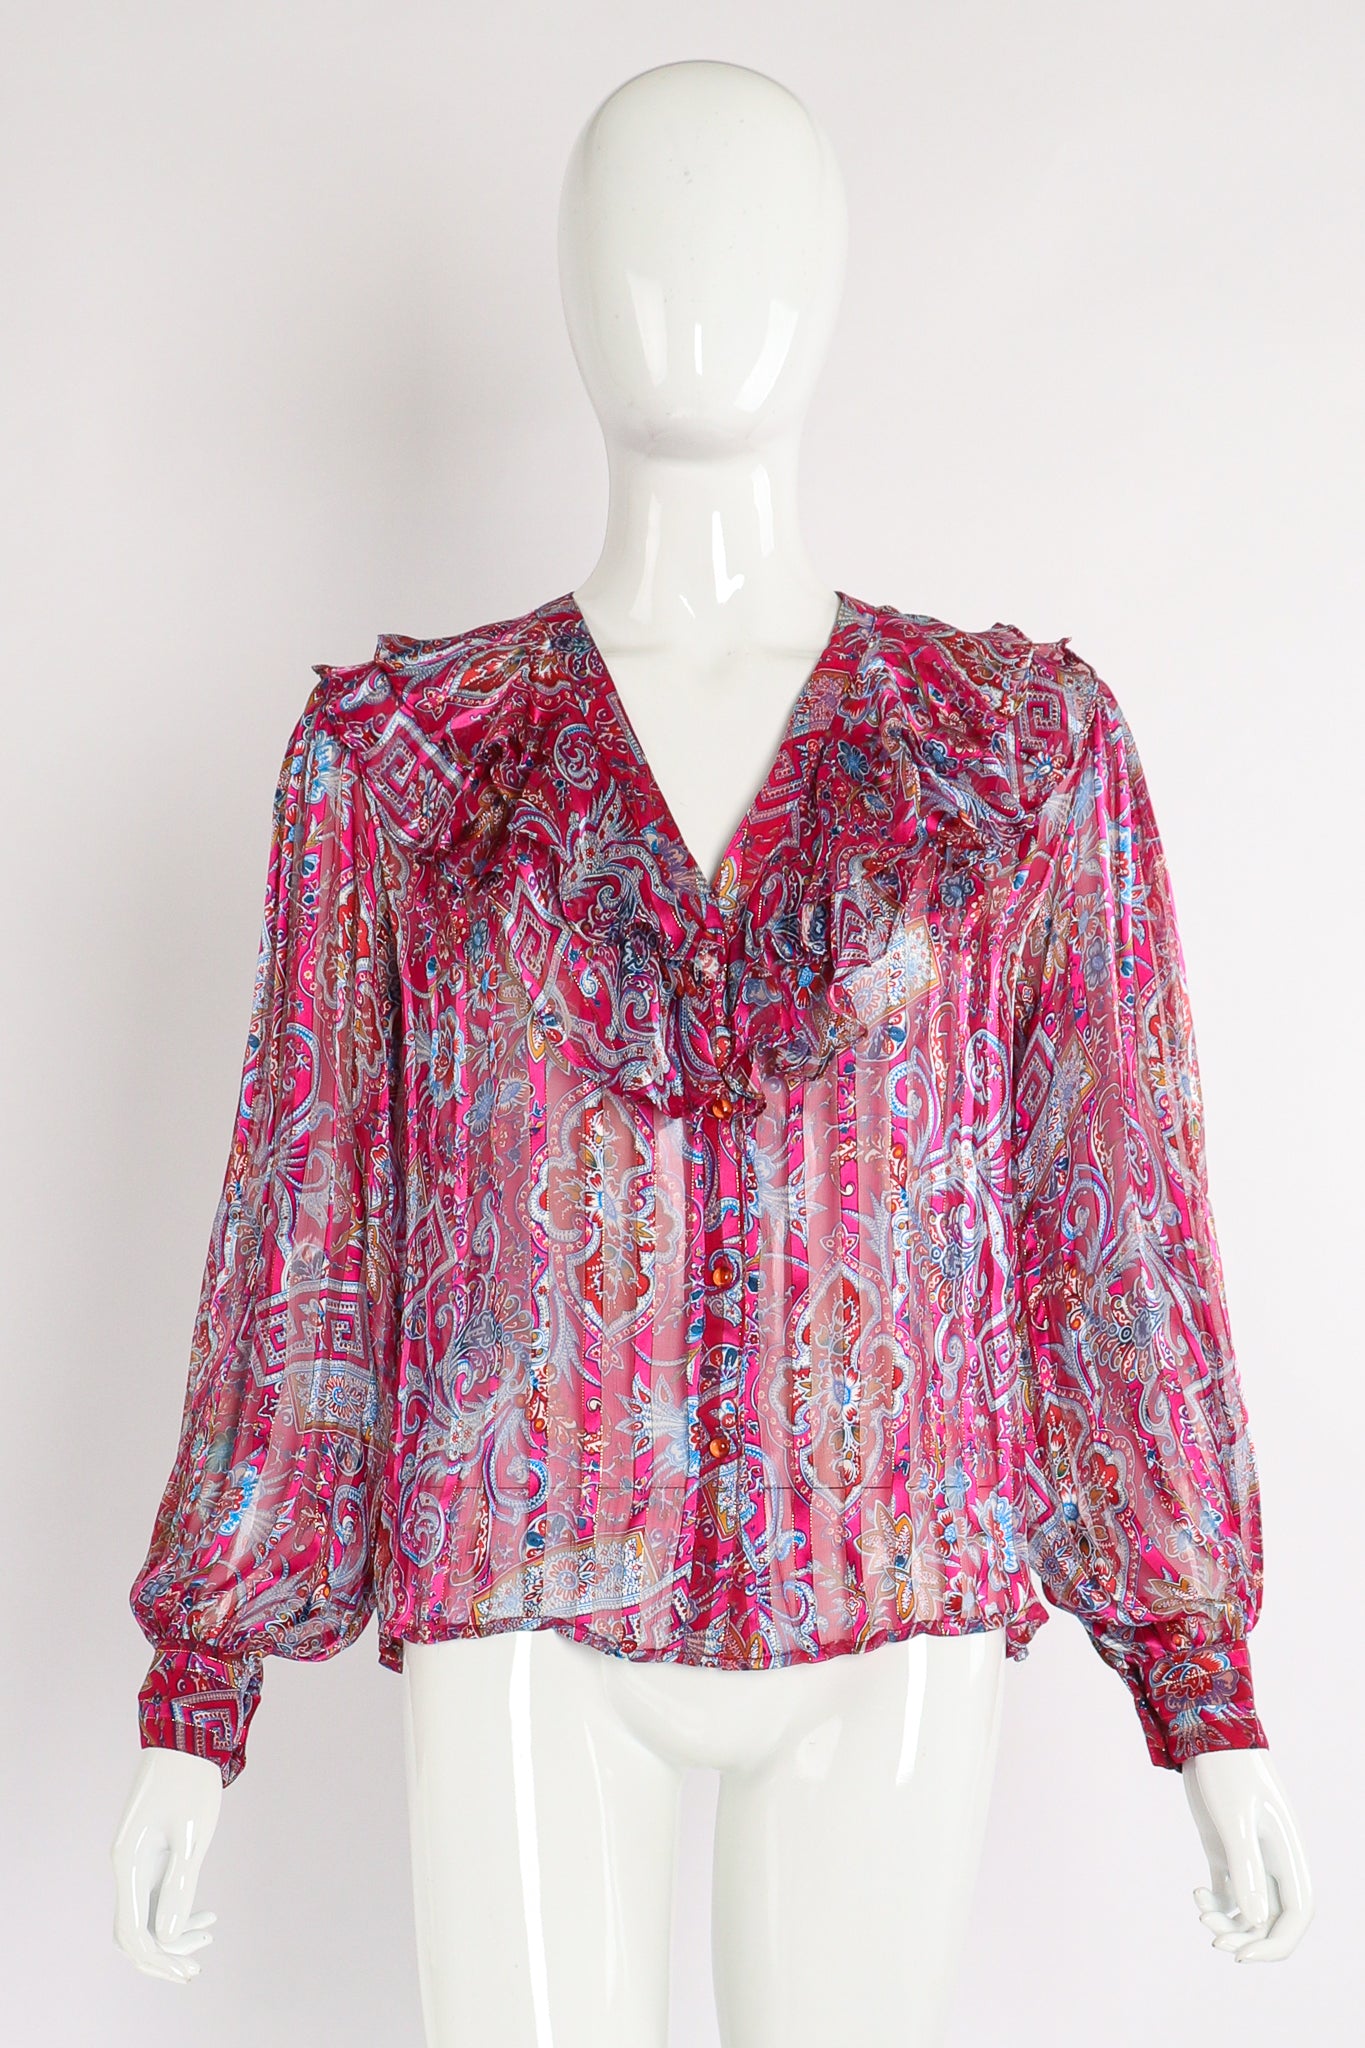 Vintage The Silk Farm Sheer Floral Stripe Ruffle Blouse on Mannequin front at Recess Los Angeles